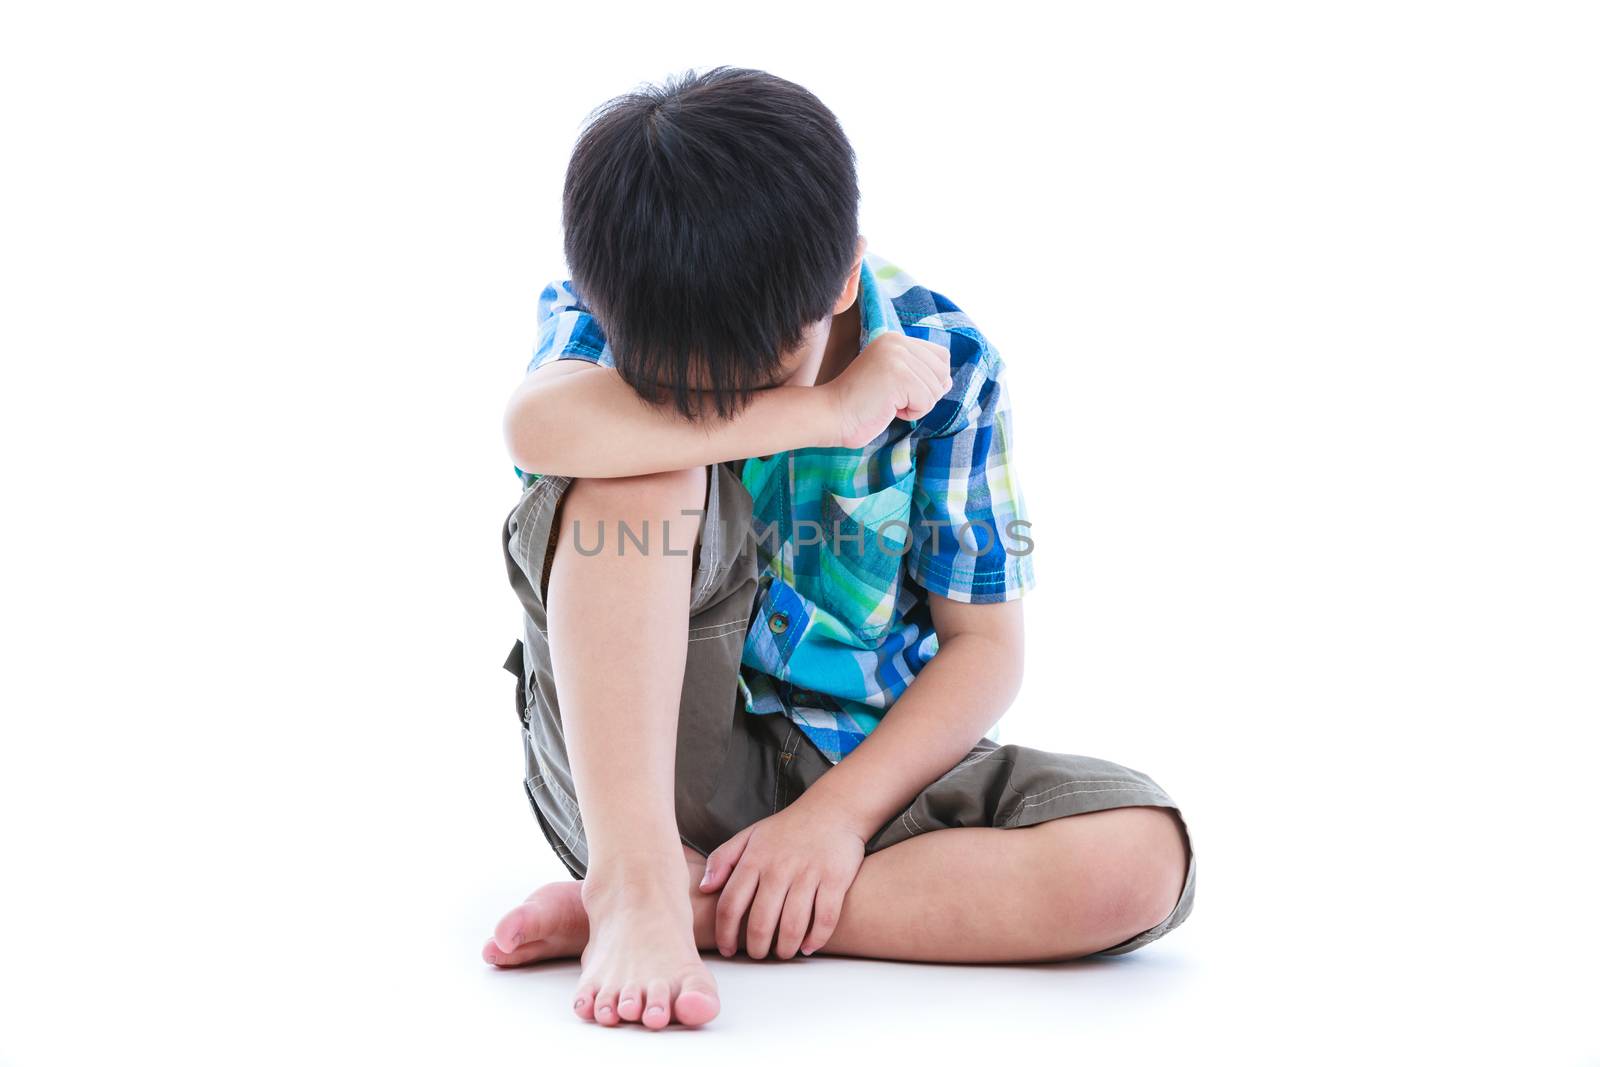 Little sad boy barefeet sitting on floor. Isolated on white background. Negative human emotions. Conceptual about children who lack warmth and affection, abandoned children.